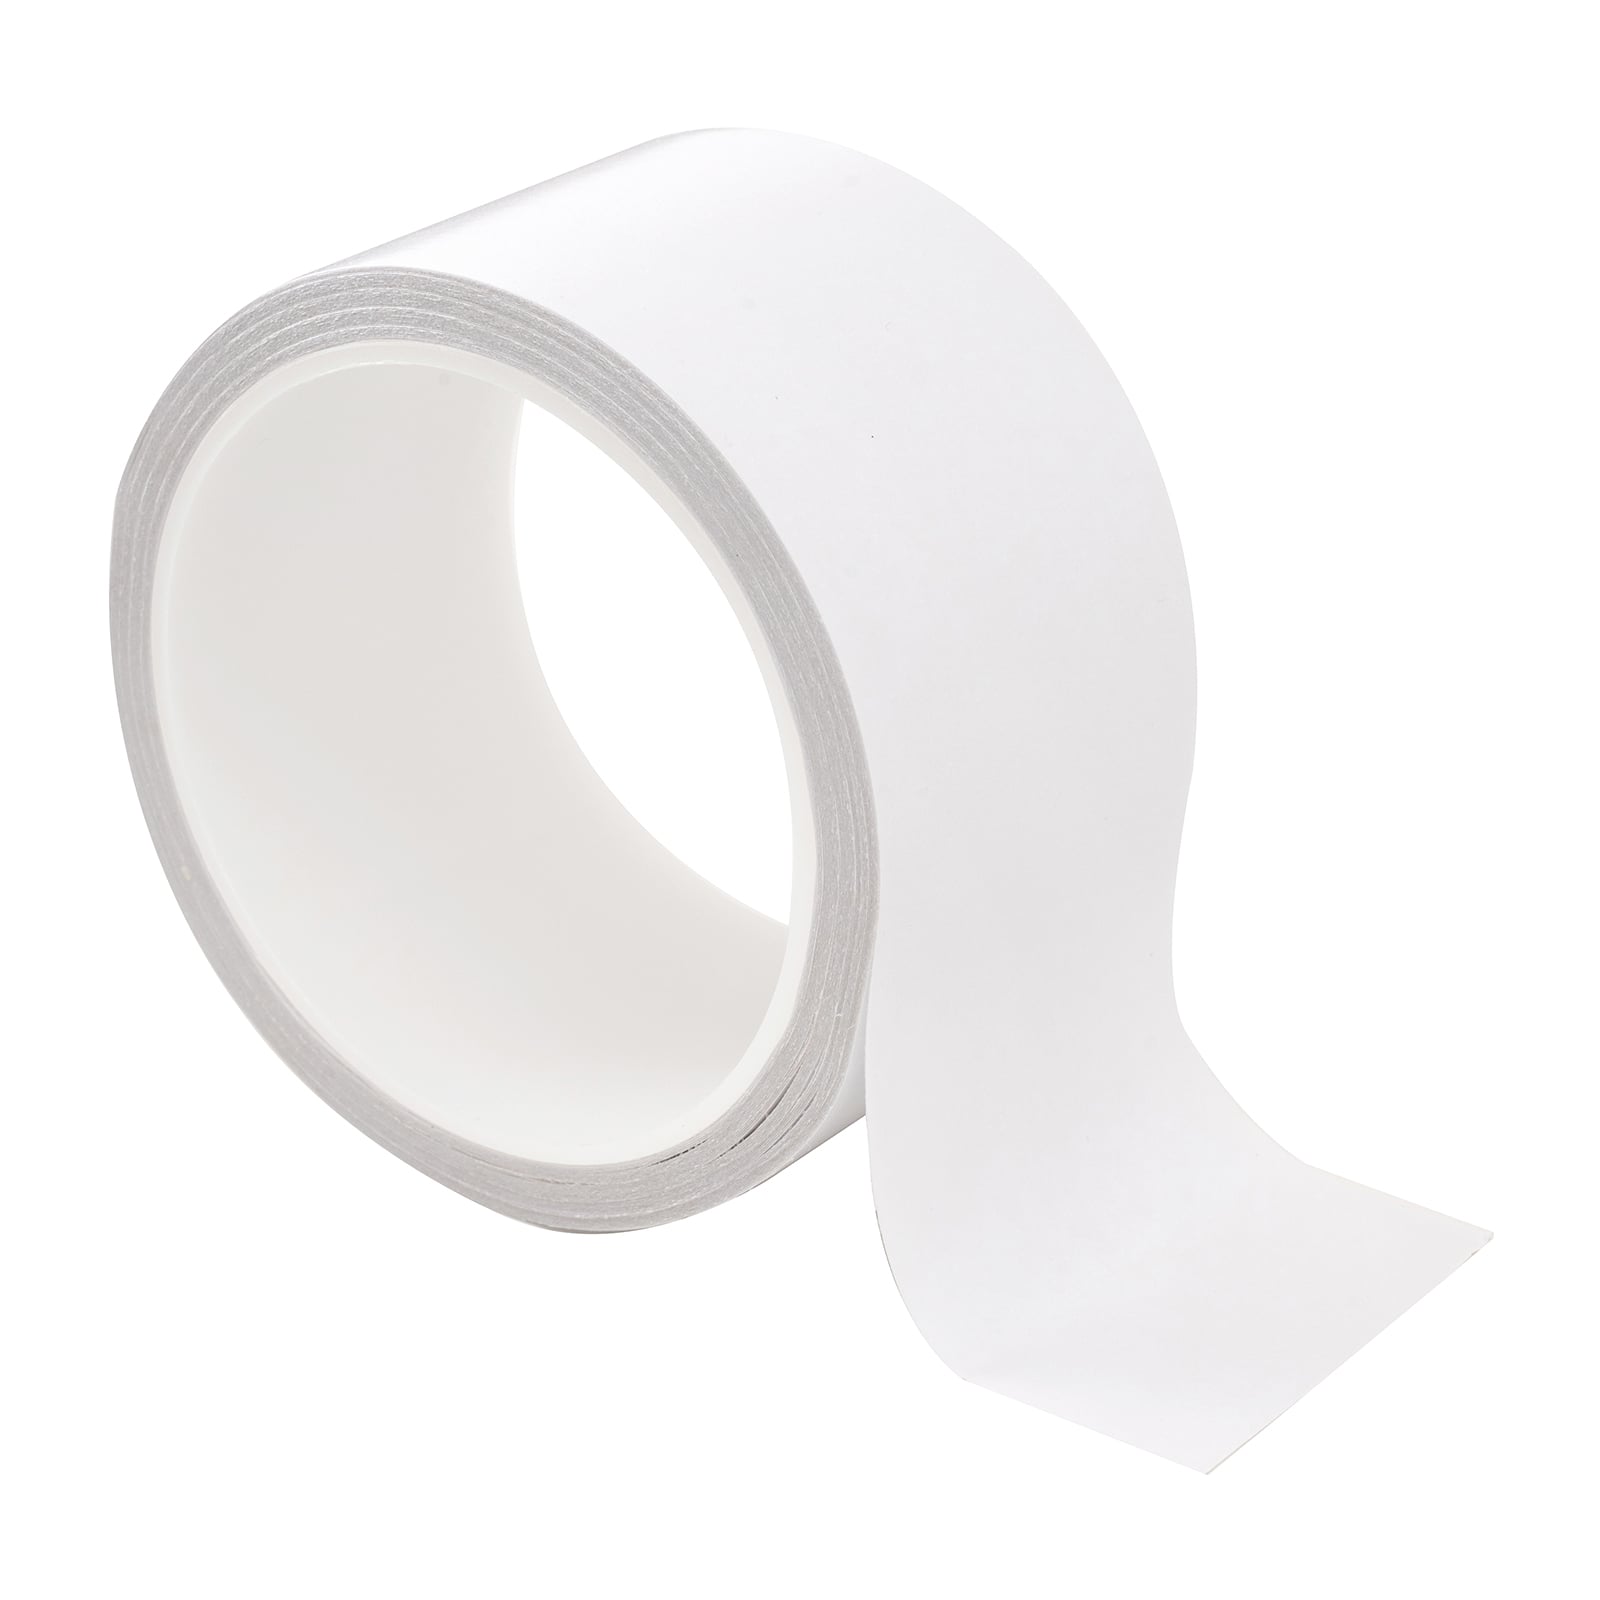 LINECO-MENDING-TISSUE (3.6m test roll), self-adhesive archive